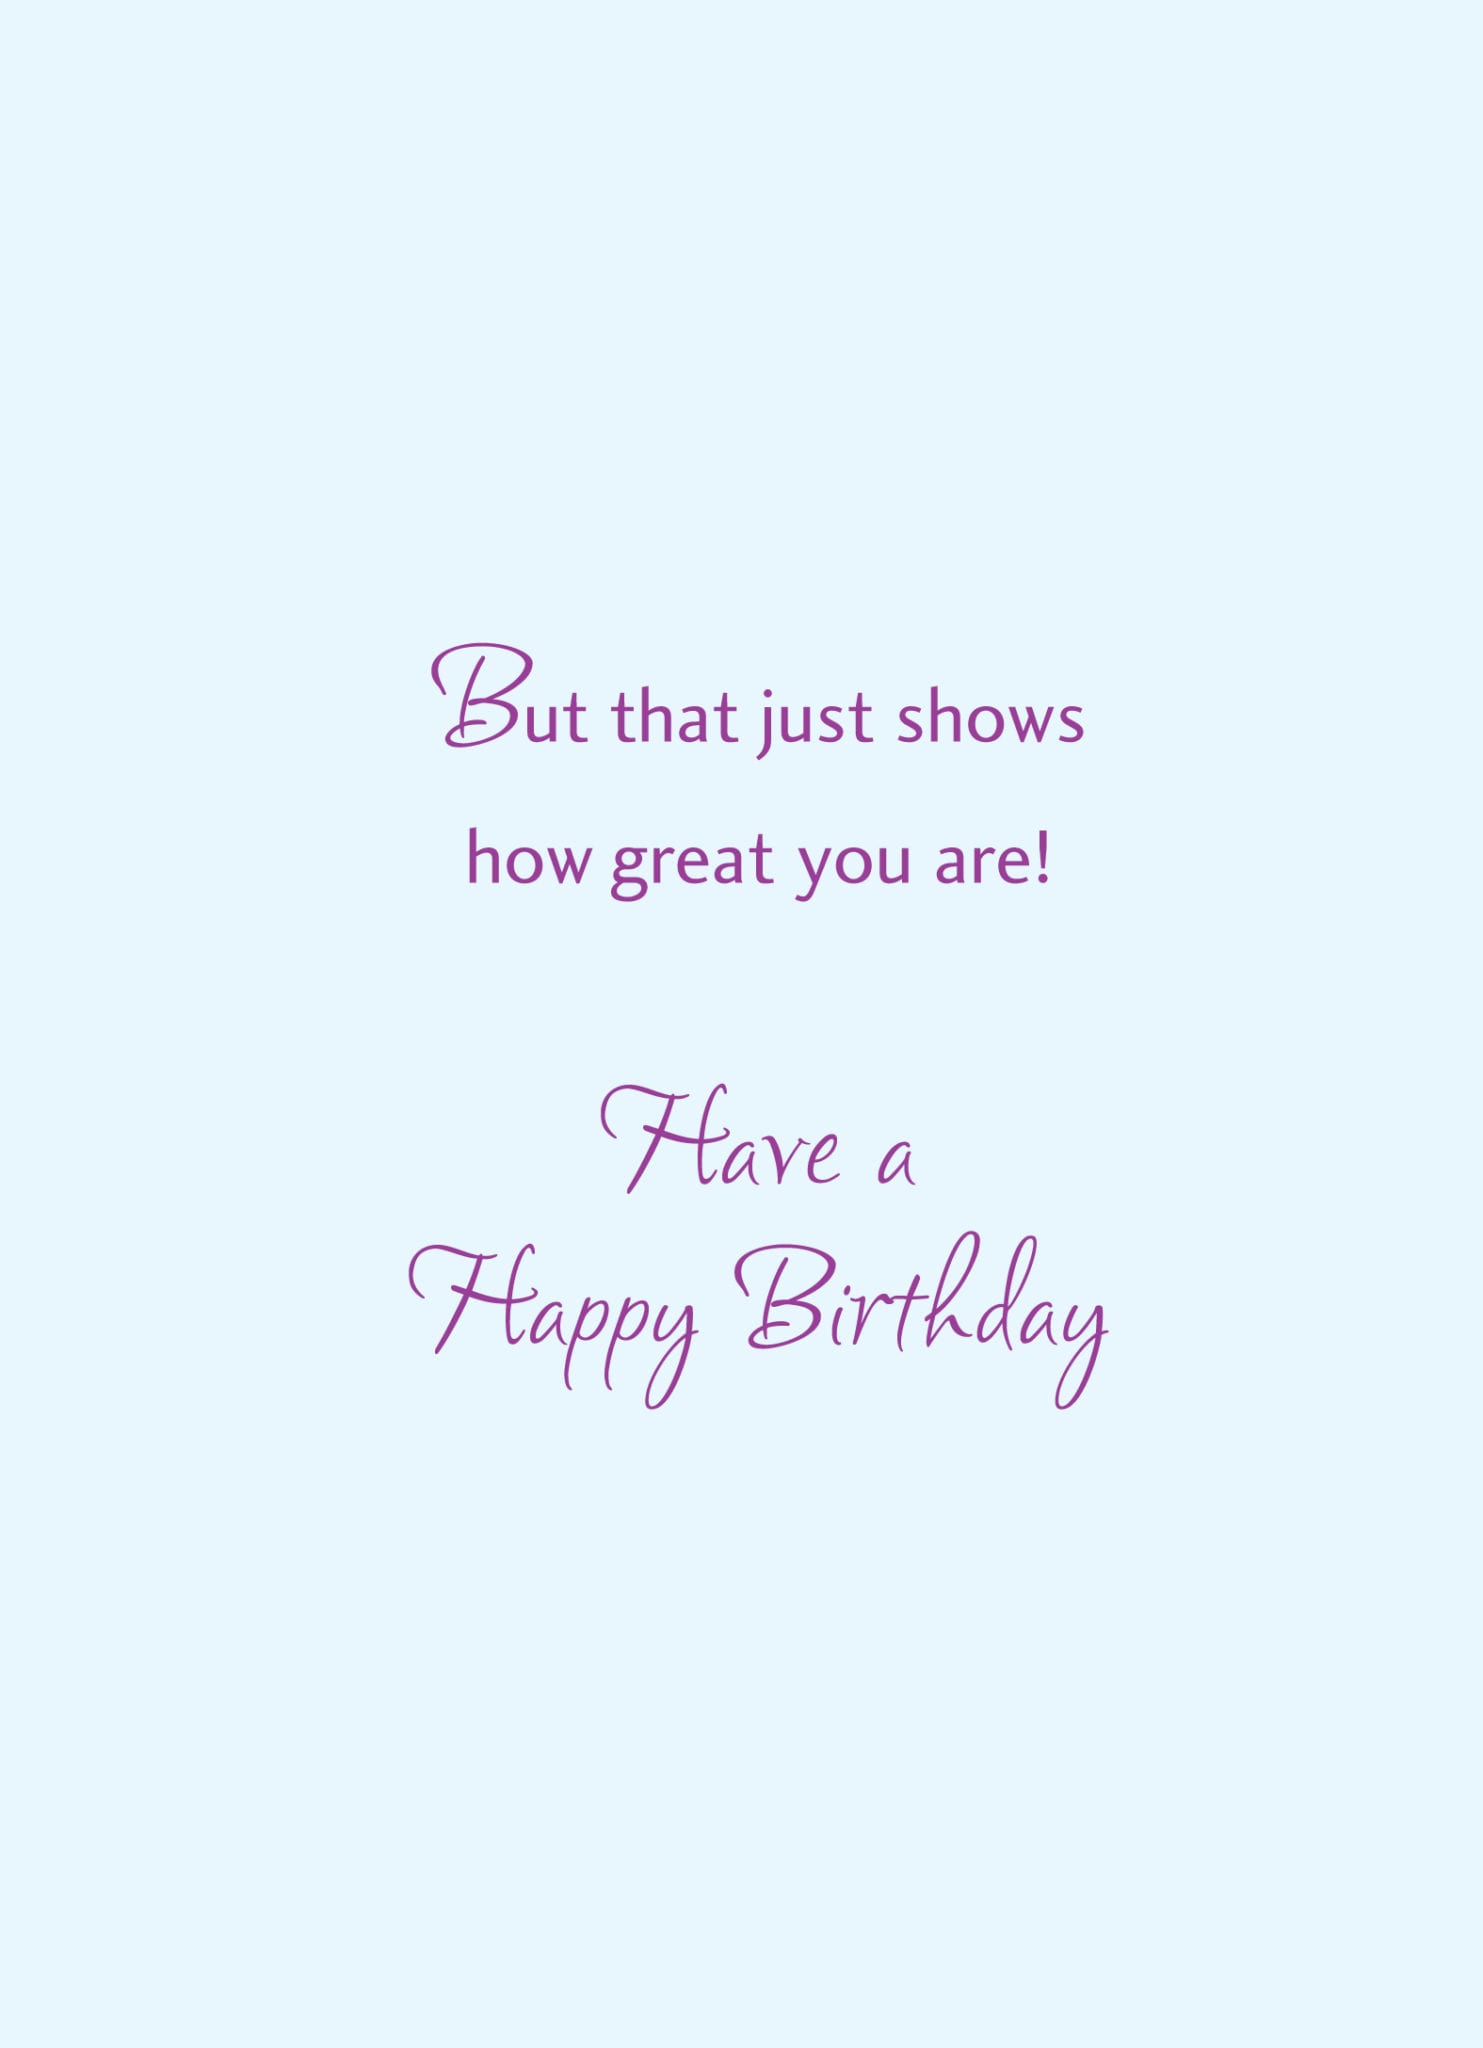 Birthday Delivery - Personalized Greeting Cards by TheGreetingCardShop.com